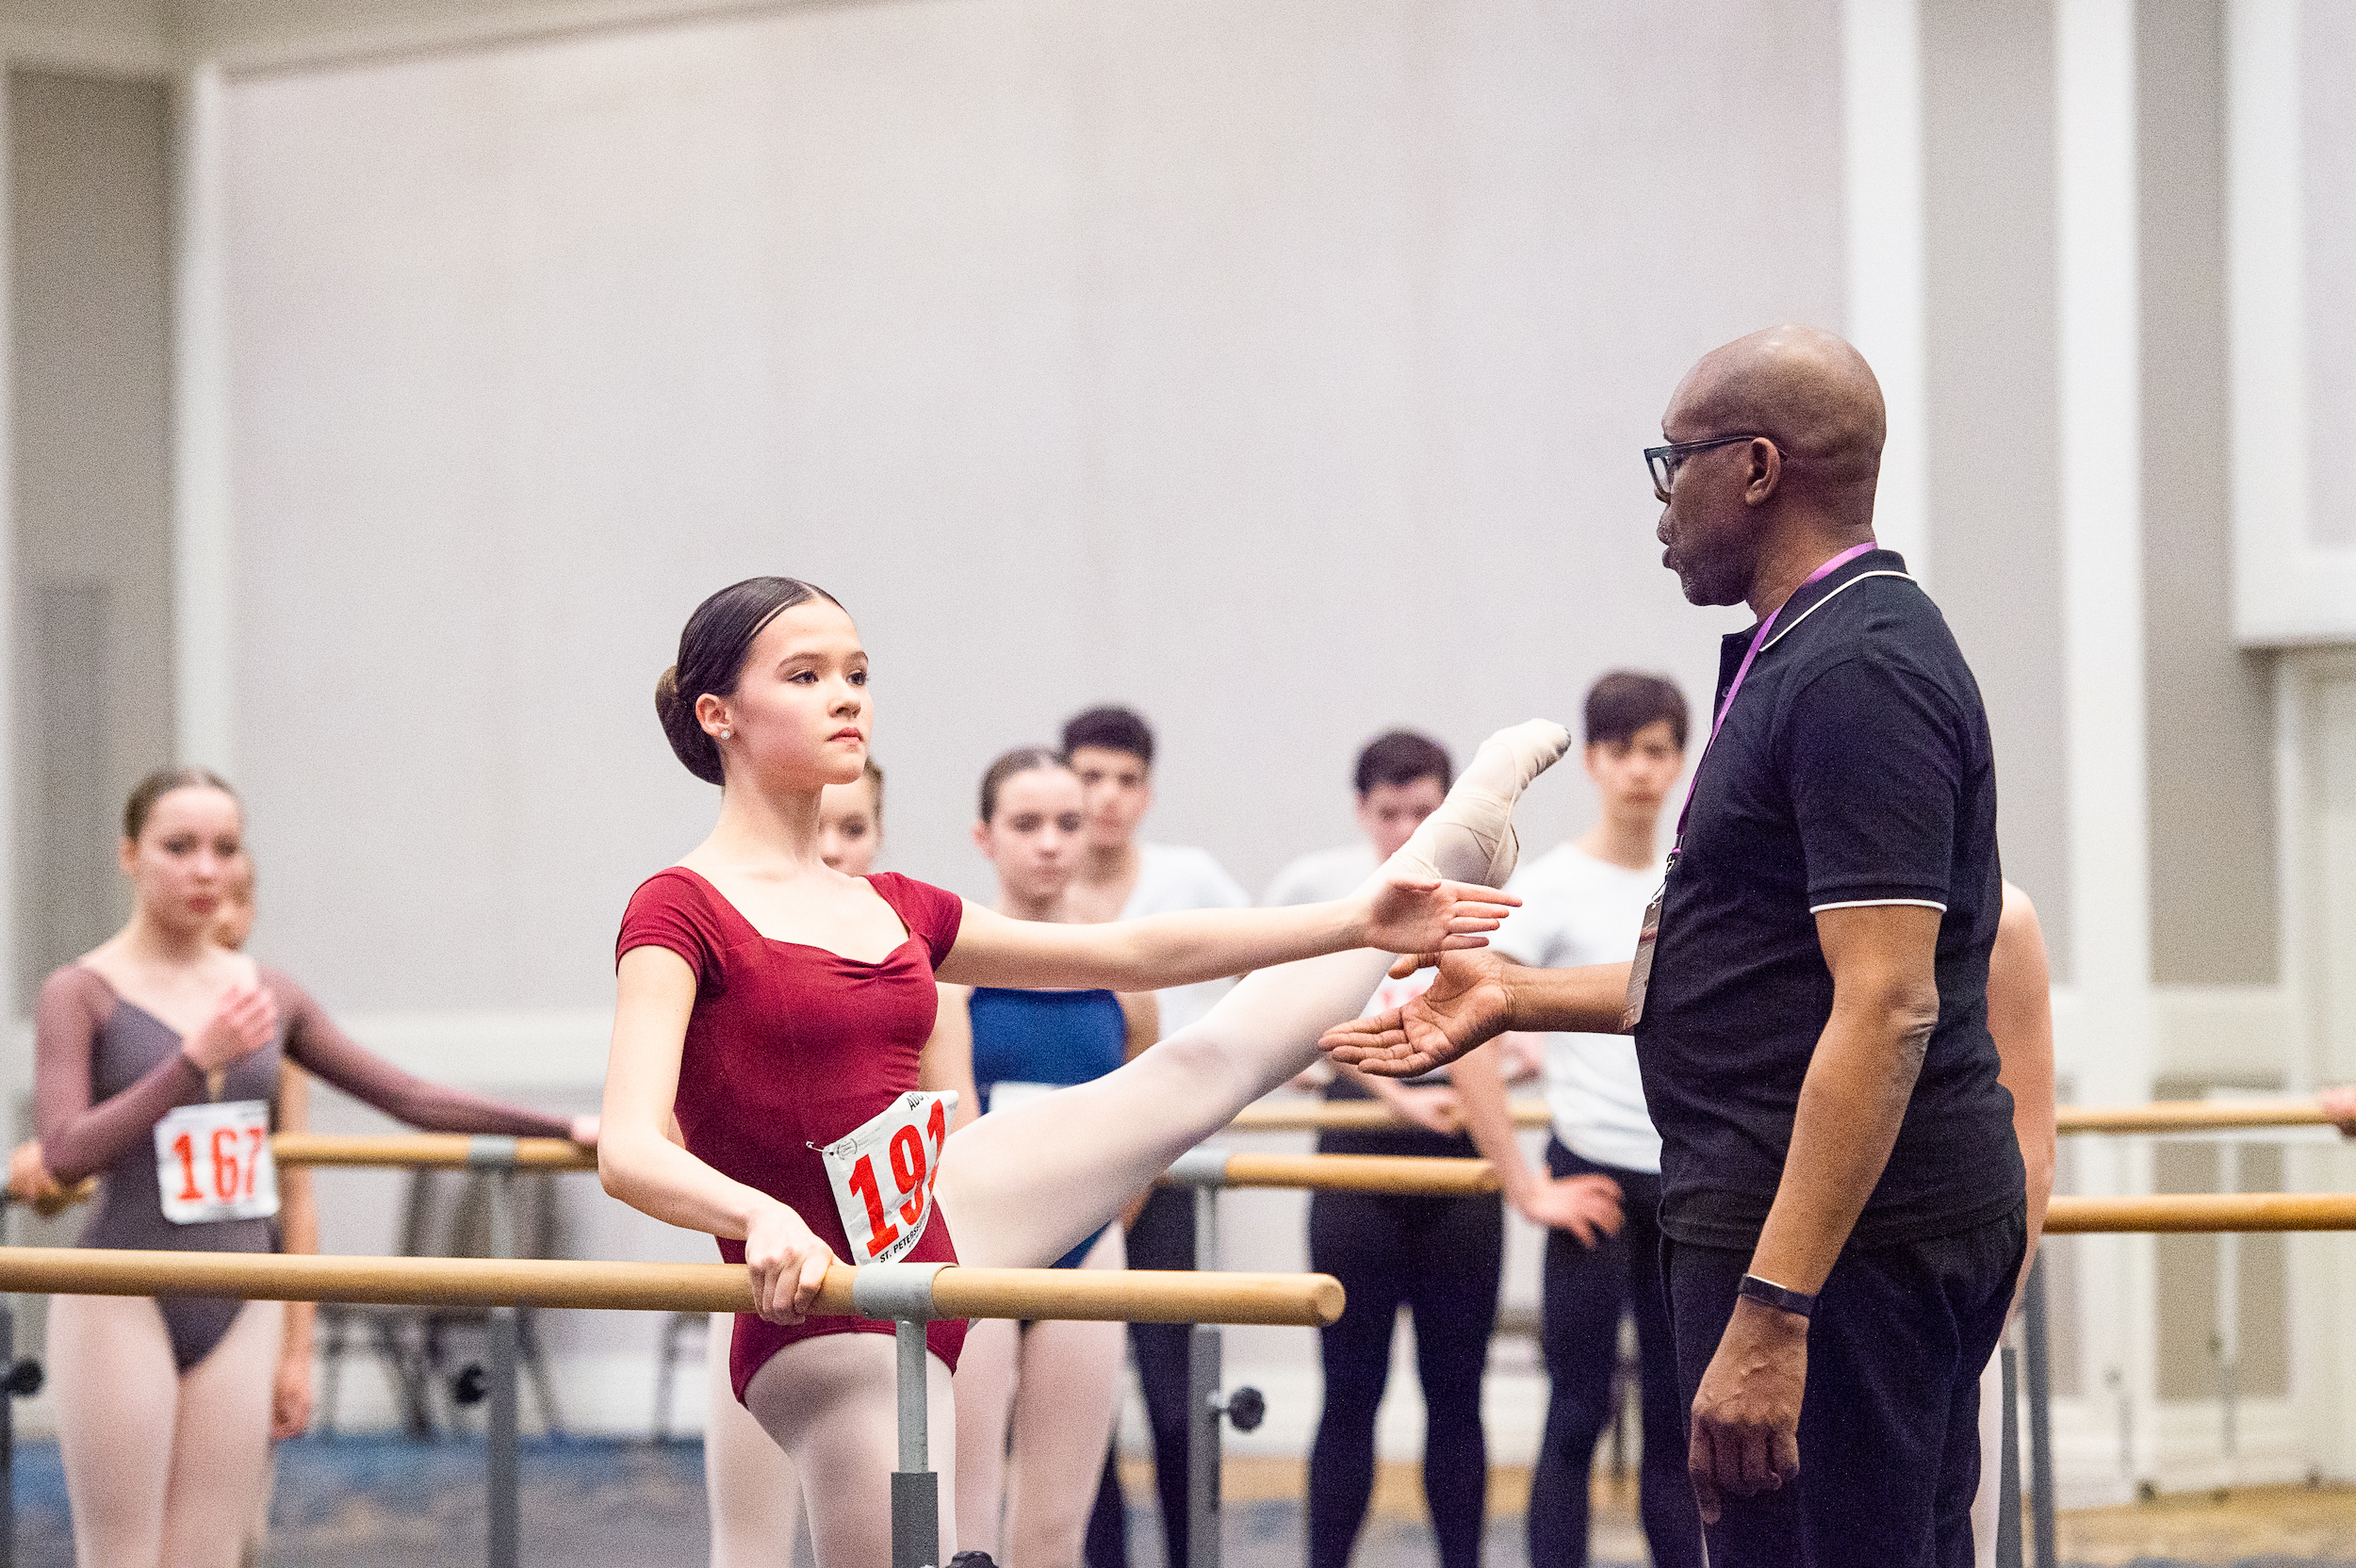 A teenage dancer in a red leotard and wearing the number 191 pinned to her torso does a développé à la seconde at the barrer with her arm in second position. Maurice Brandond Curry, wearing a black polo shirt and black pants, stands in front of her and points to her calf as he gives a acorrection. Other male and females dancers stand around them at the barres and watch.